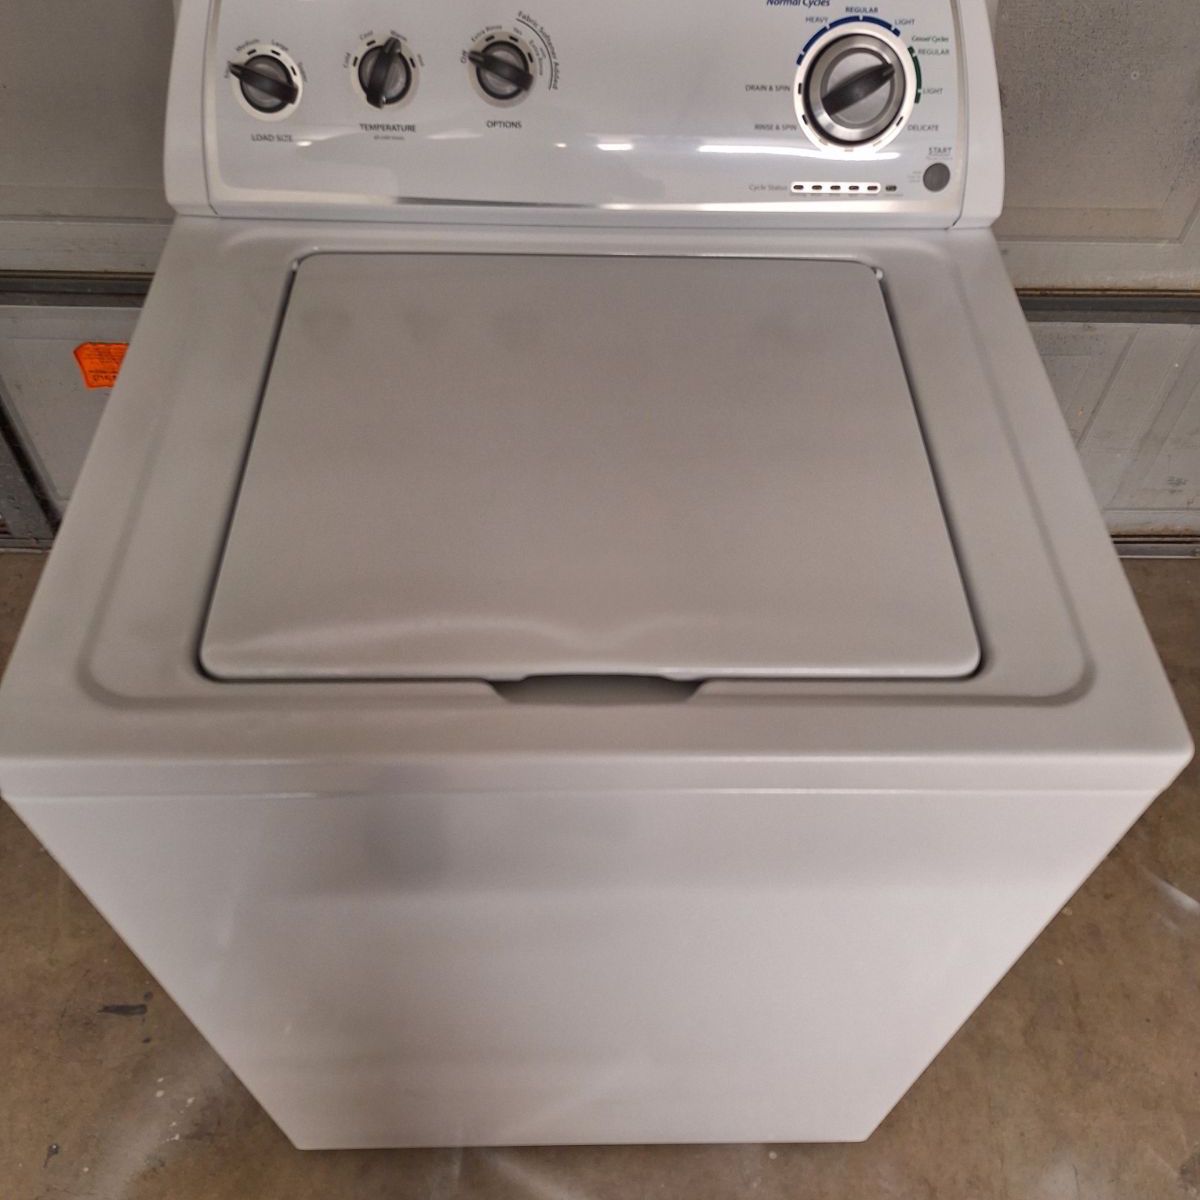 WHIRLPOOL WASHER $275 DELIVERED AND INSTALLED 90 DAY WARRANTY 